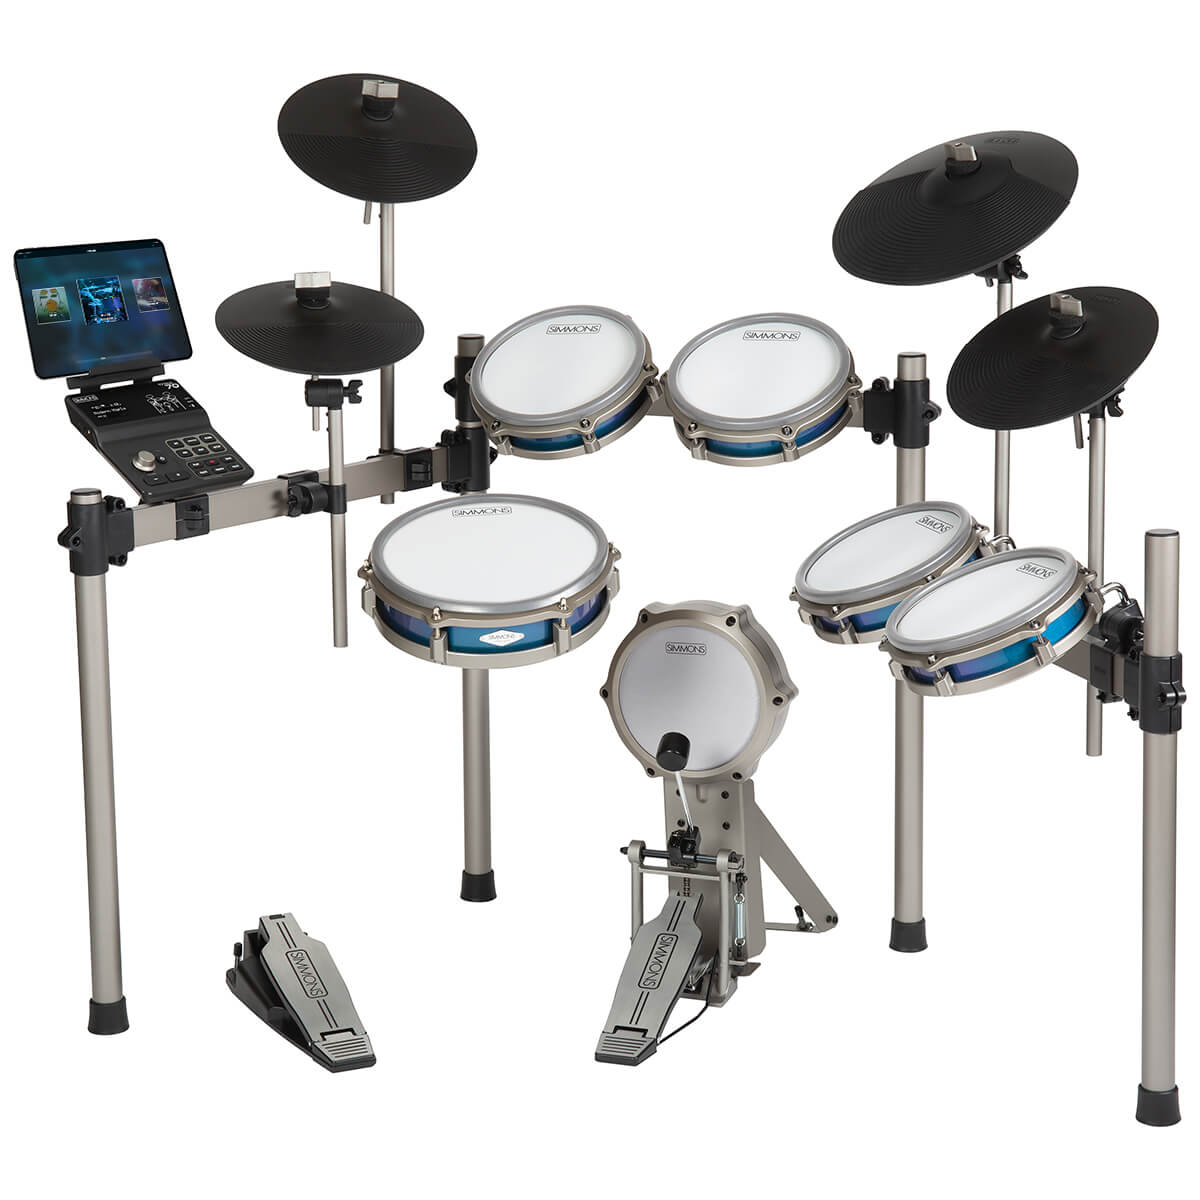 on white image of the simmons titan 70 electronic drum kit